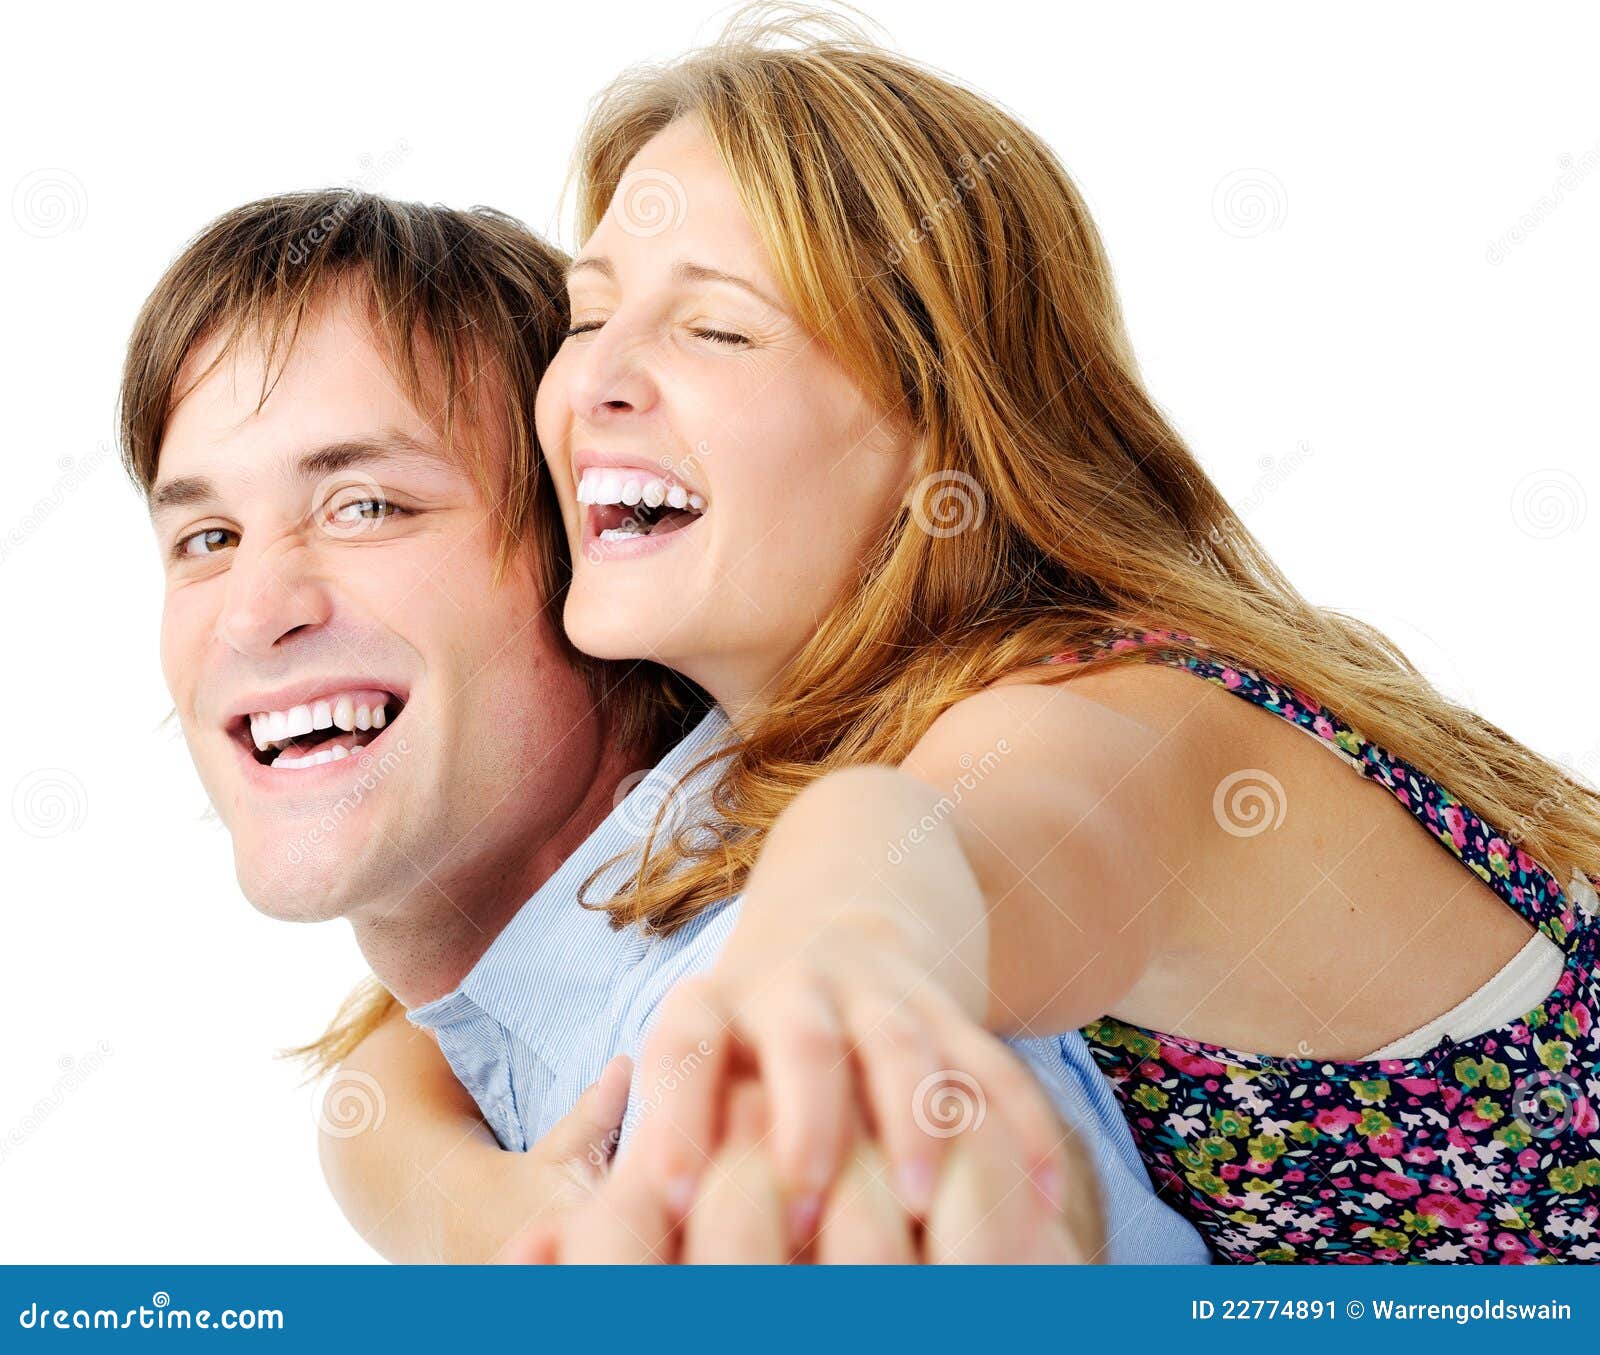 Real Emotion Couple Stock Image Image Of Caucasian